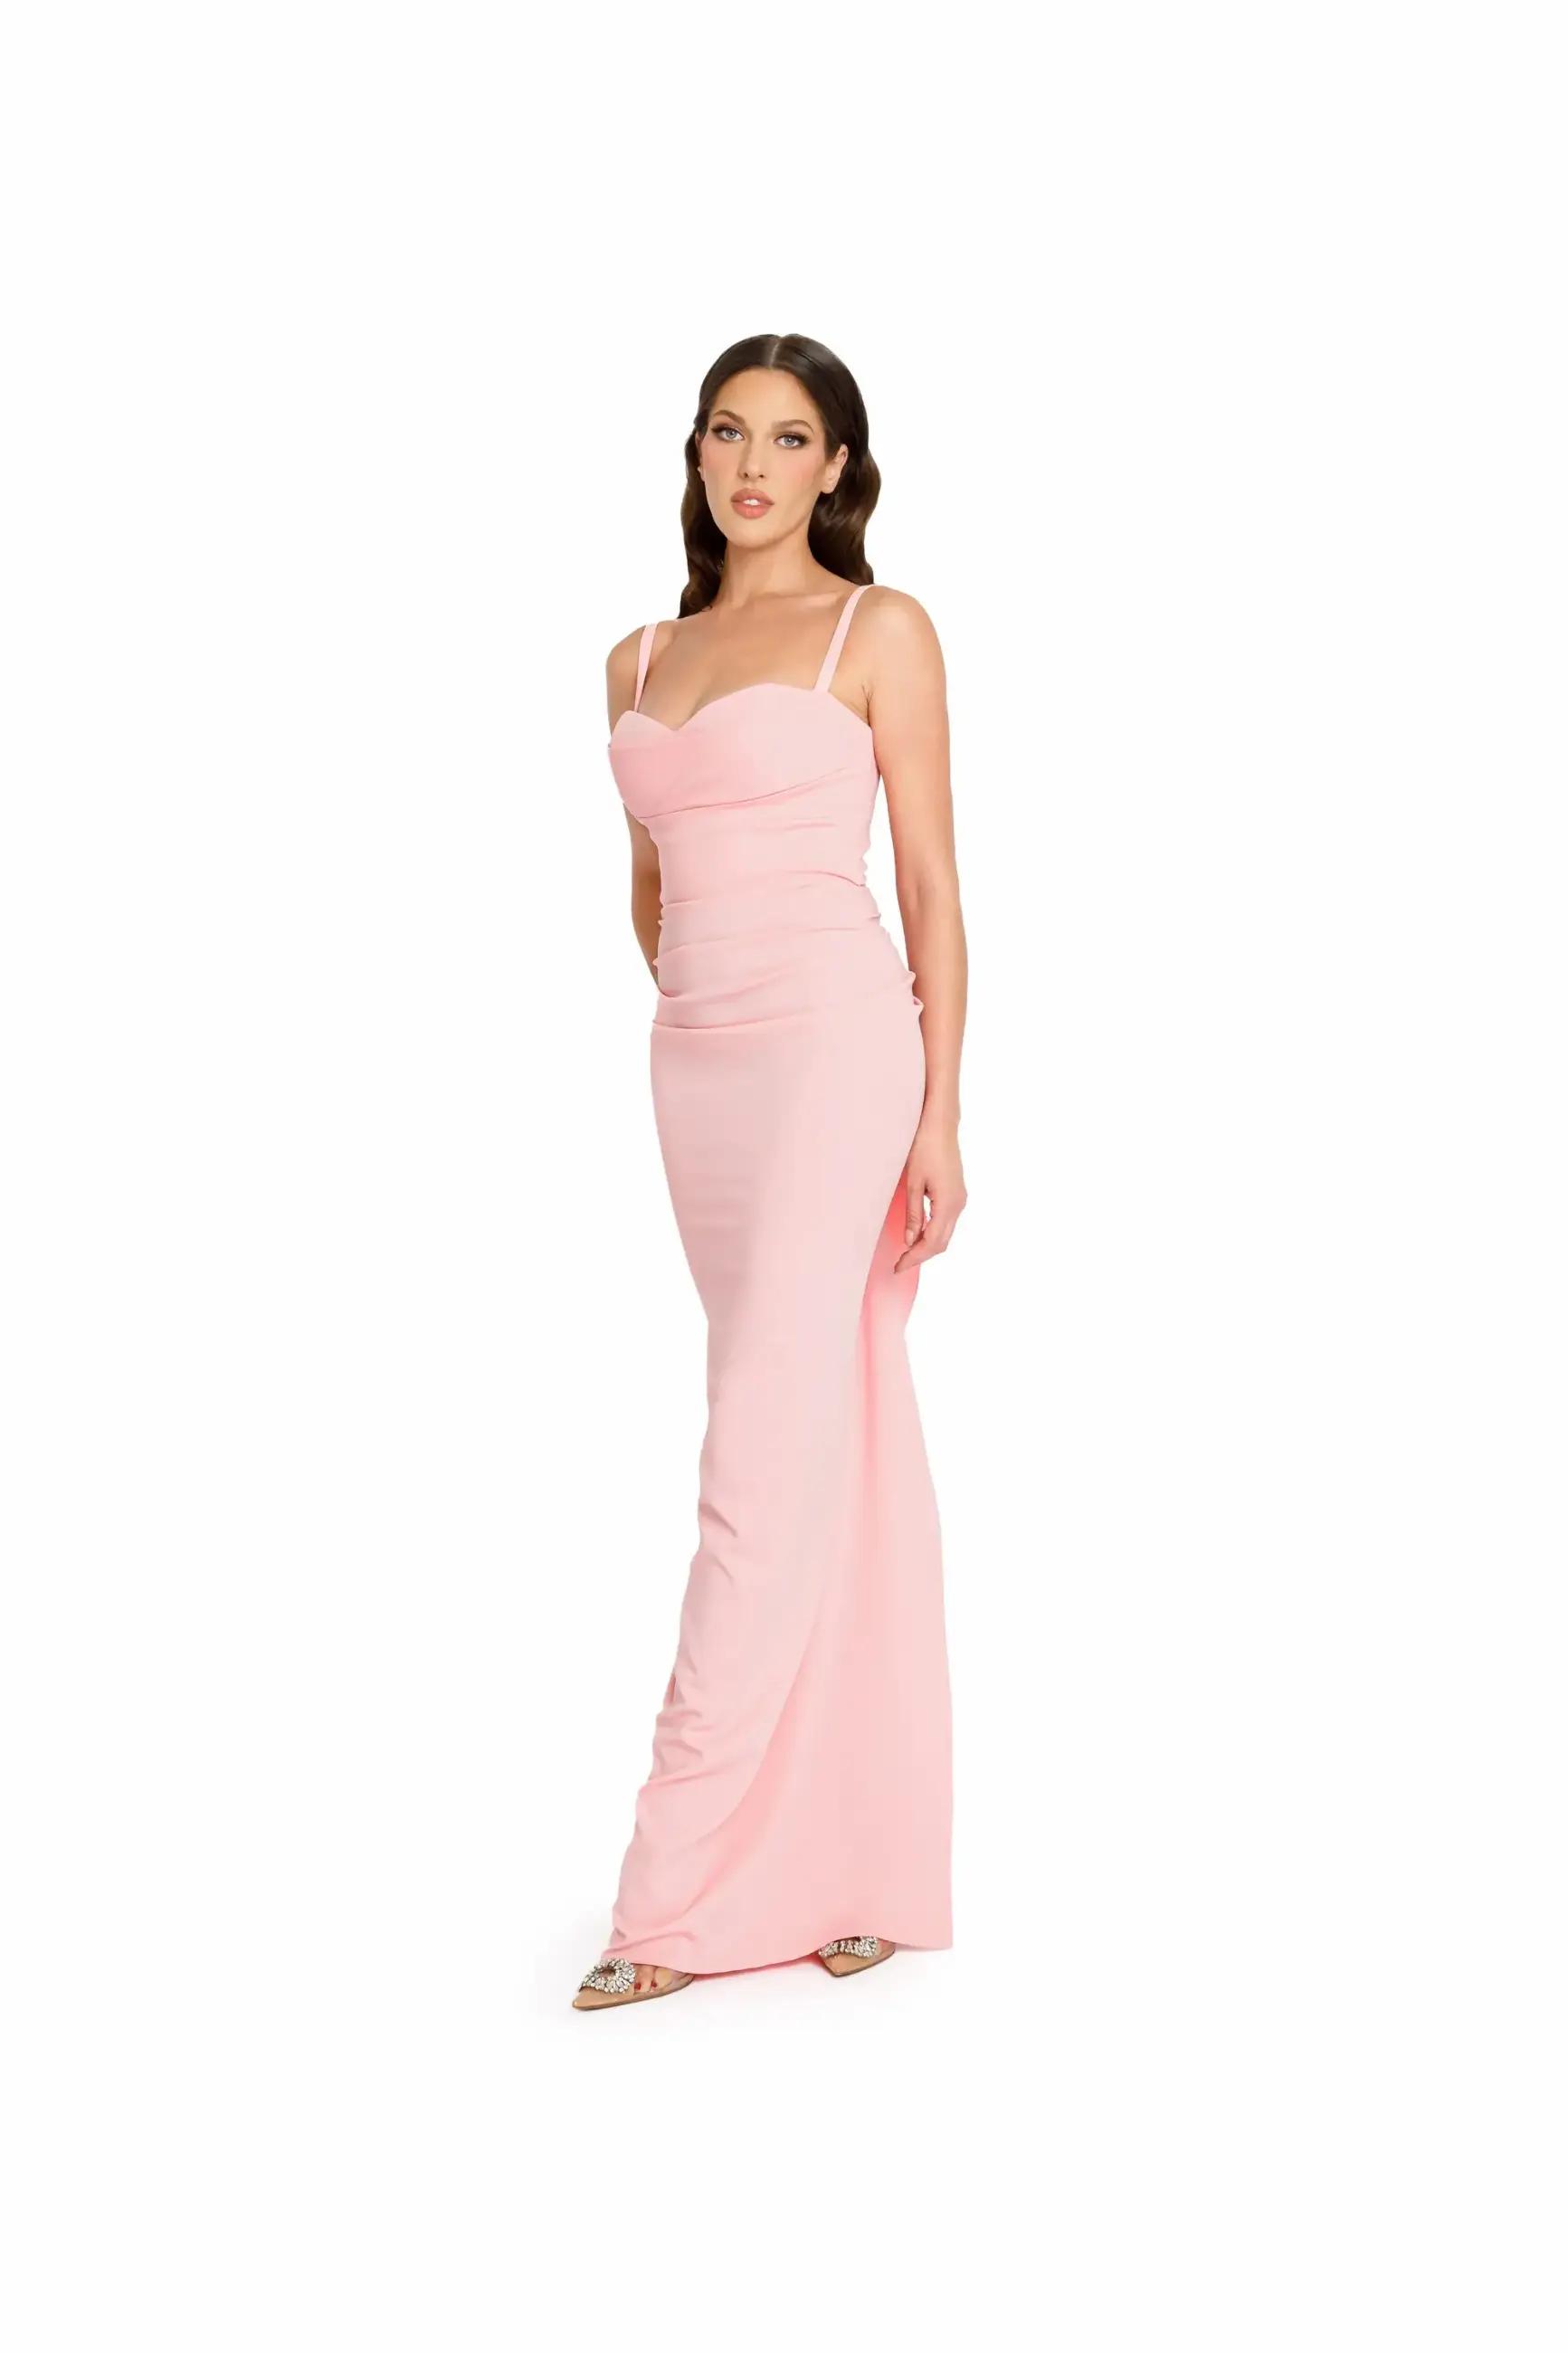 Model wearing a long pink evening gown